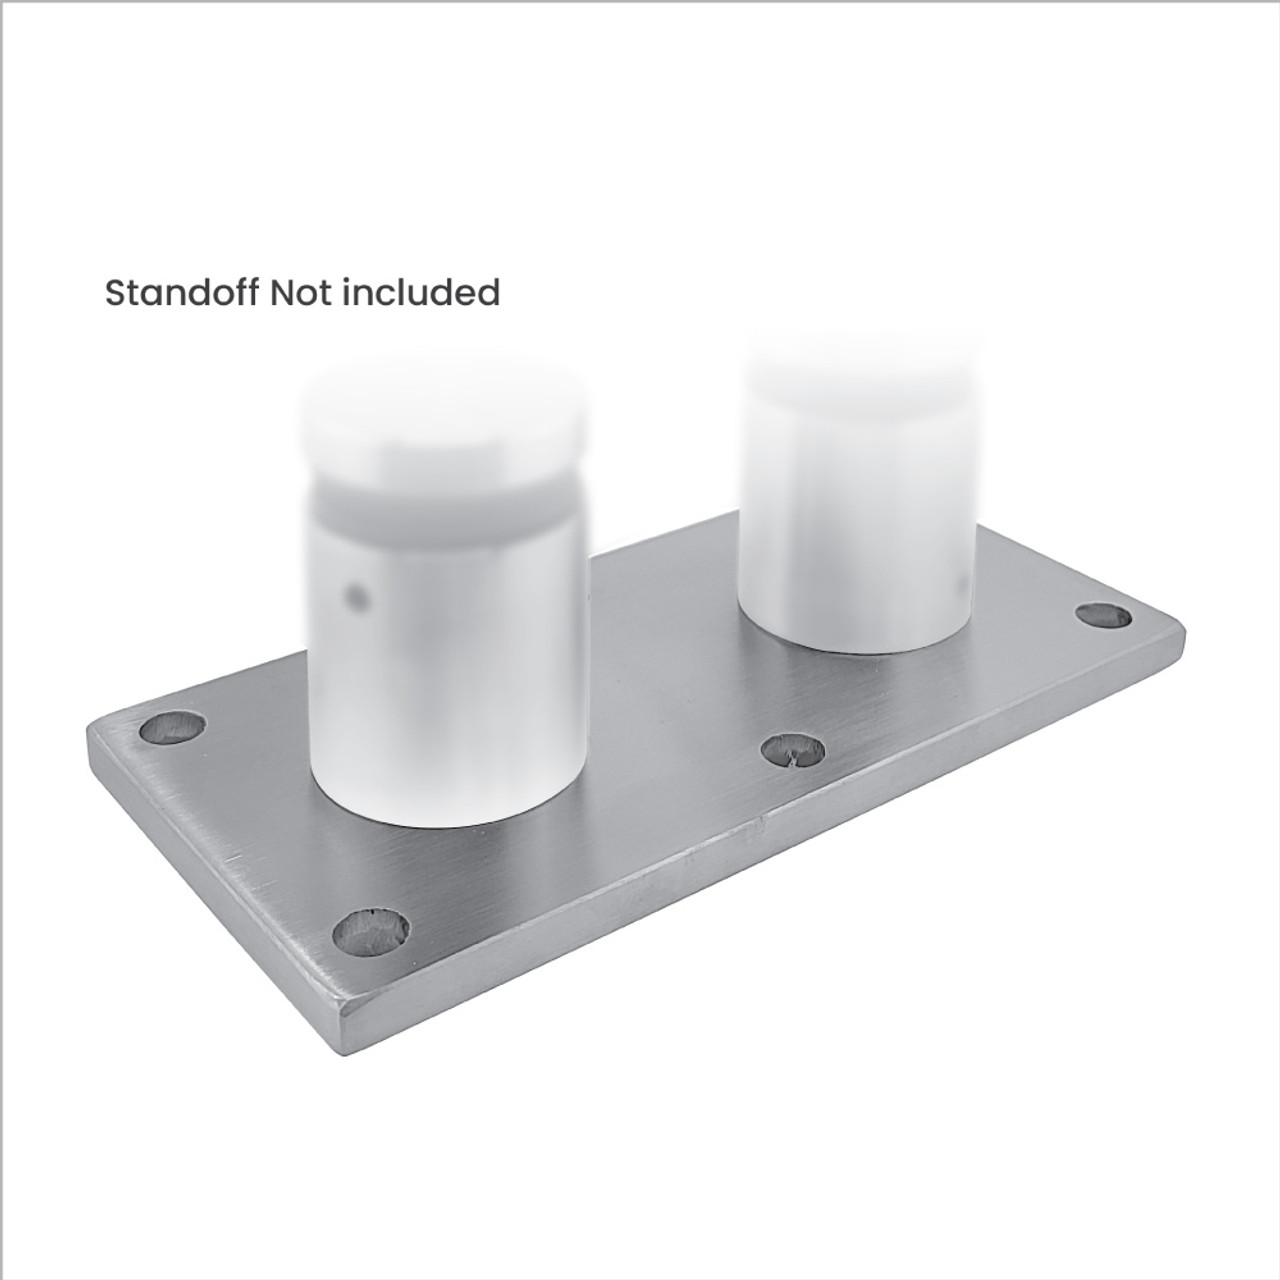 SO622PLATE840 | 8"X4"5/16" STANDOFF PLATE ONLY |  INCLUDES 2 PIECES OF 3/8" FLAT HEAD MACHINE SCREWS 